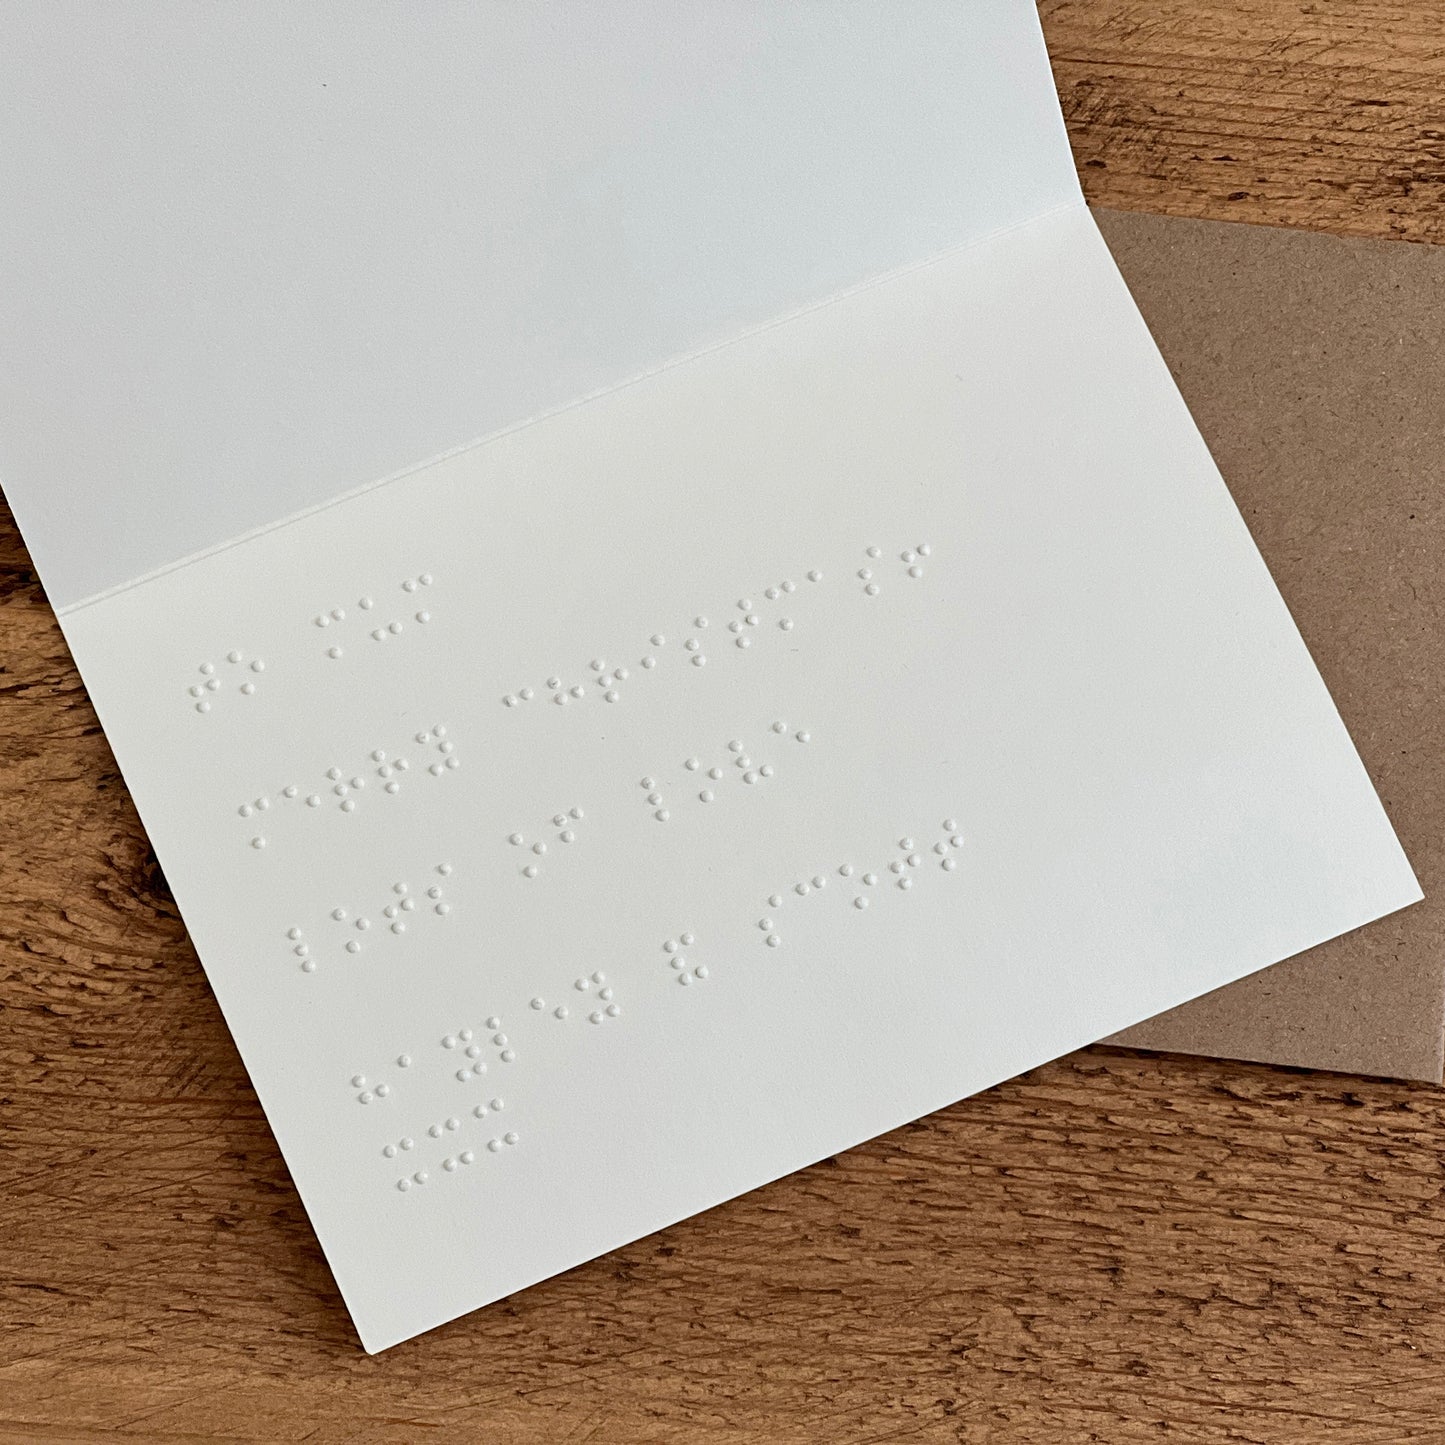 The inside of a card with a braille message.